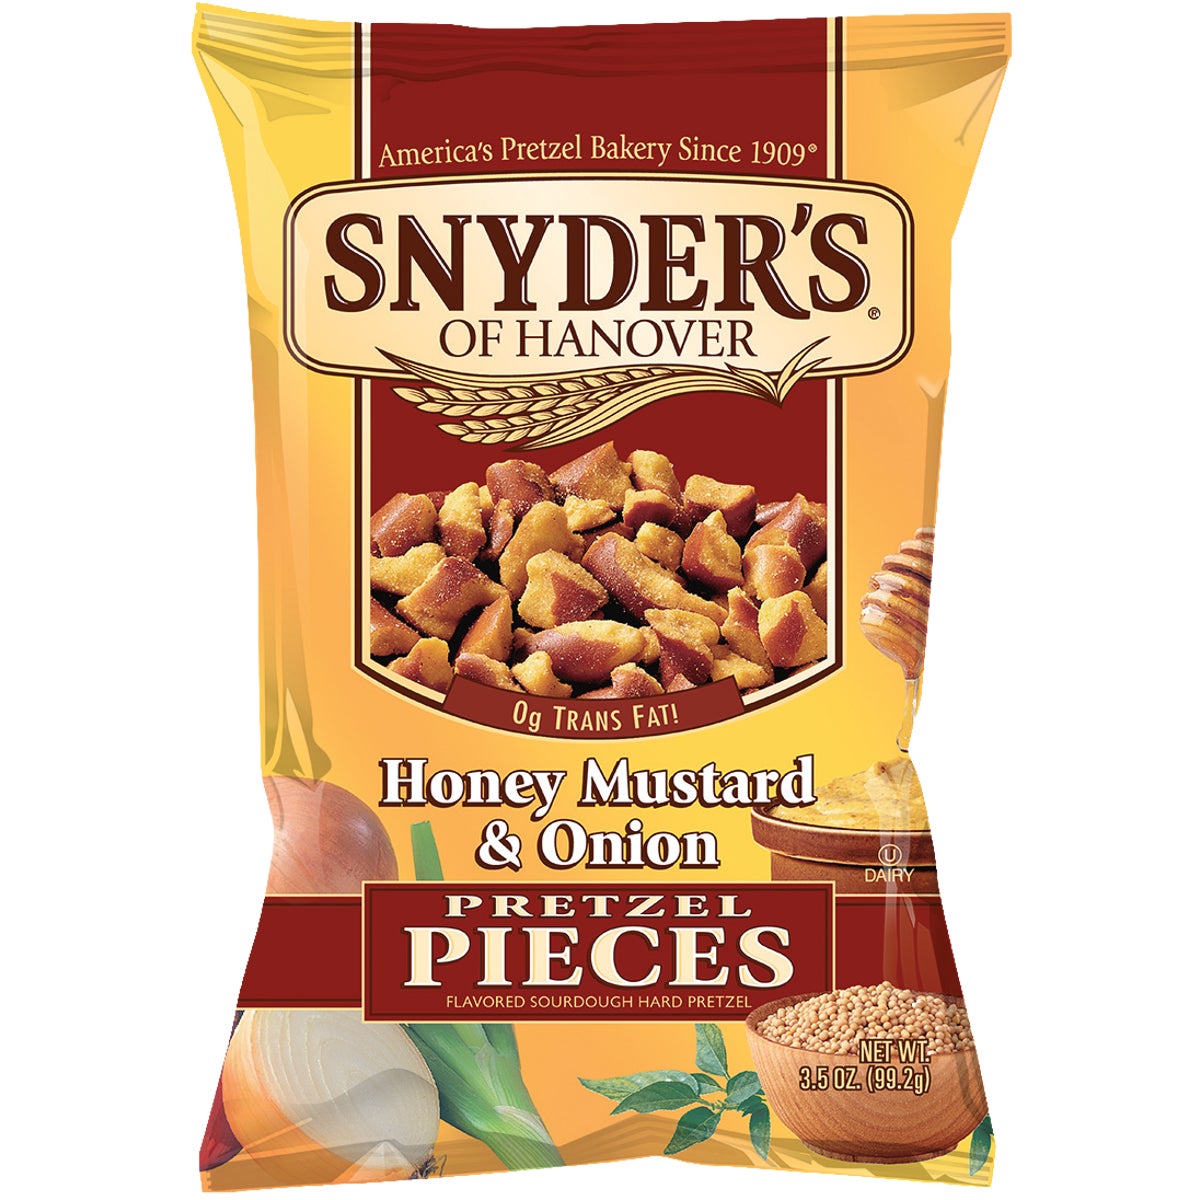 Item 970561, Enjoy a delicious, savory snack at any time of the day with Snyder's of 